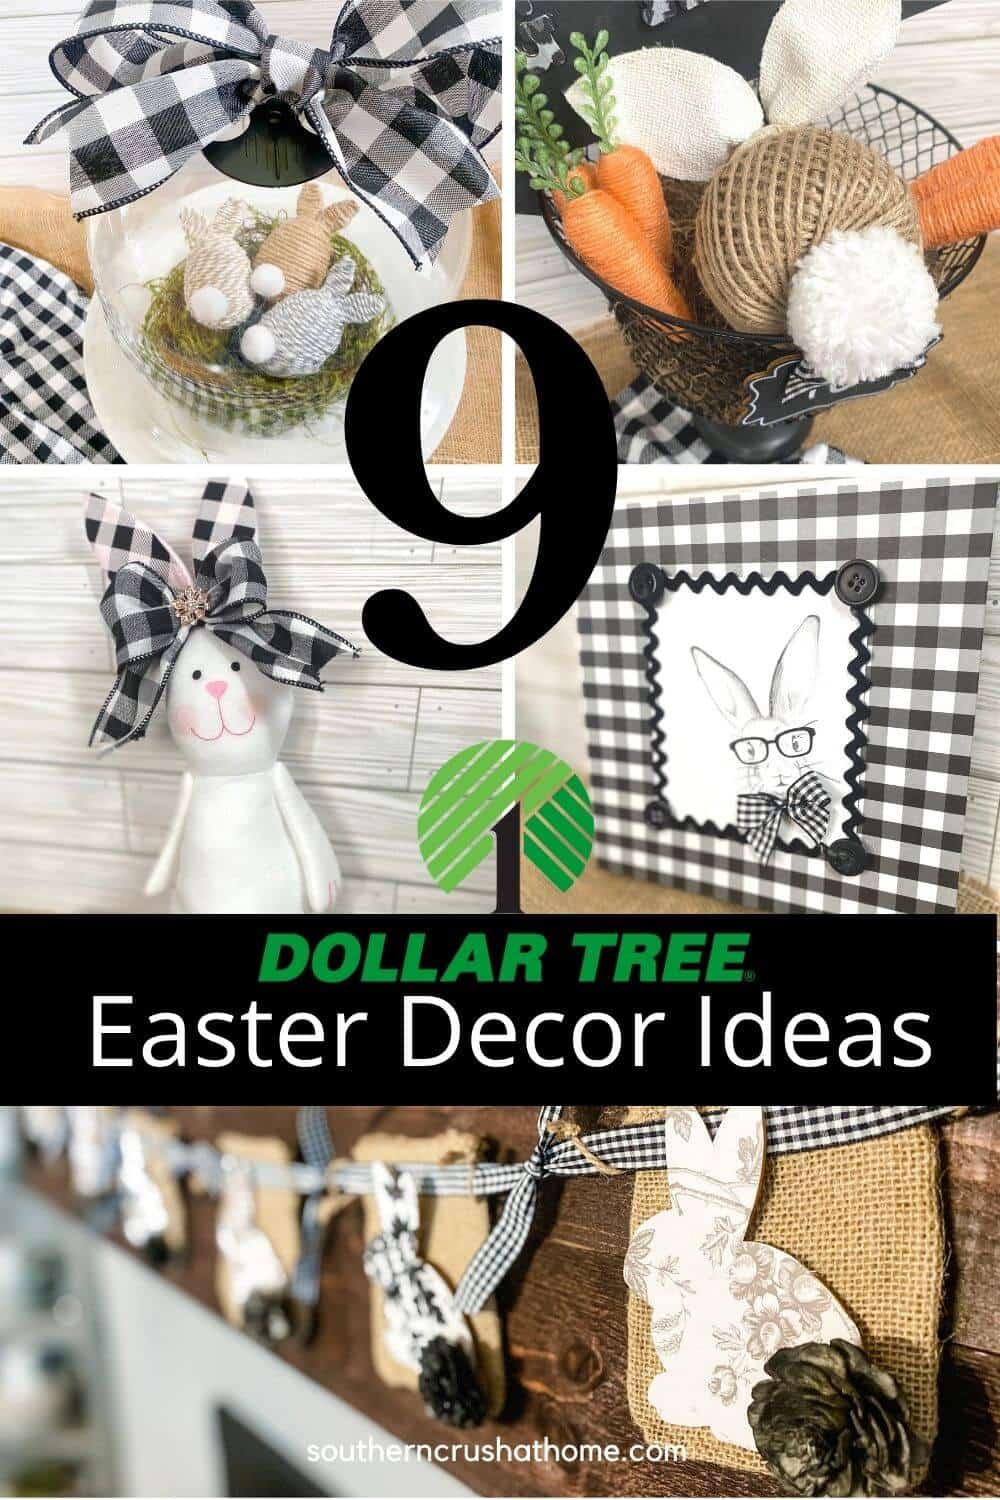 Rosette Ornaments & Bunny Bows Paper Crafts